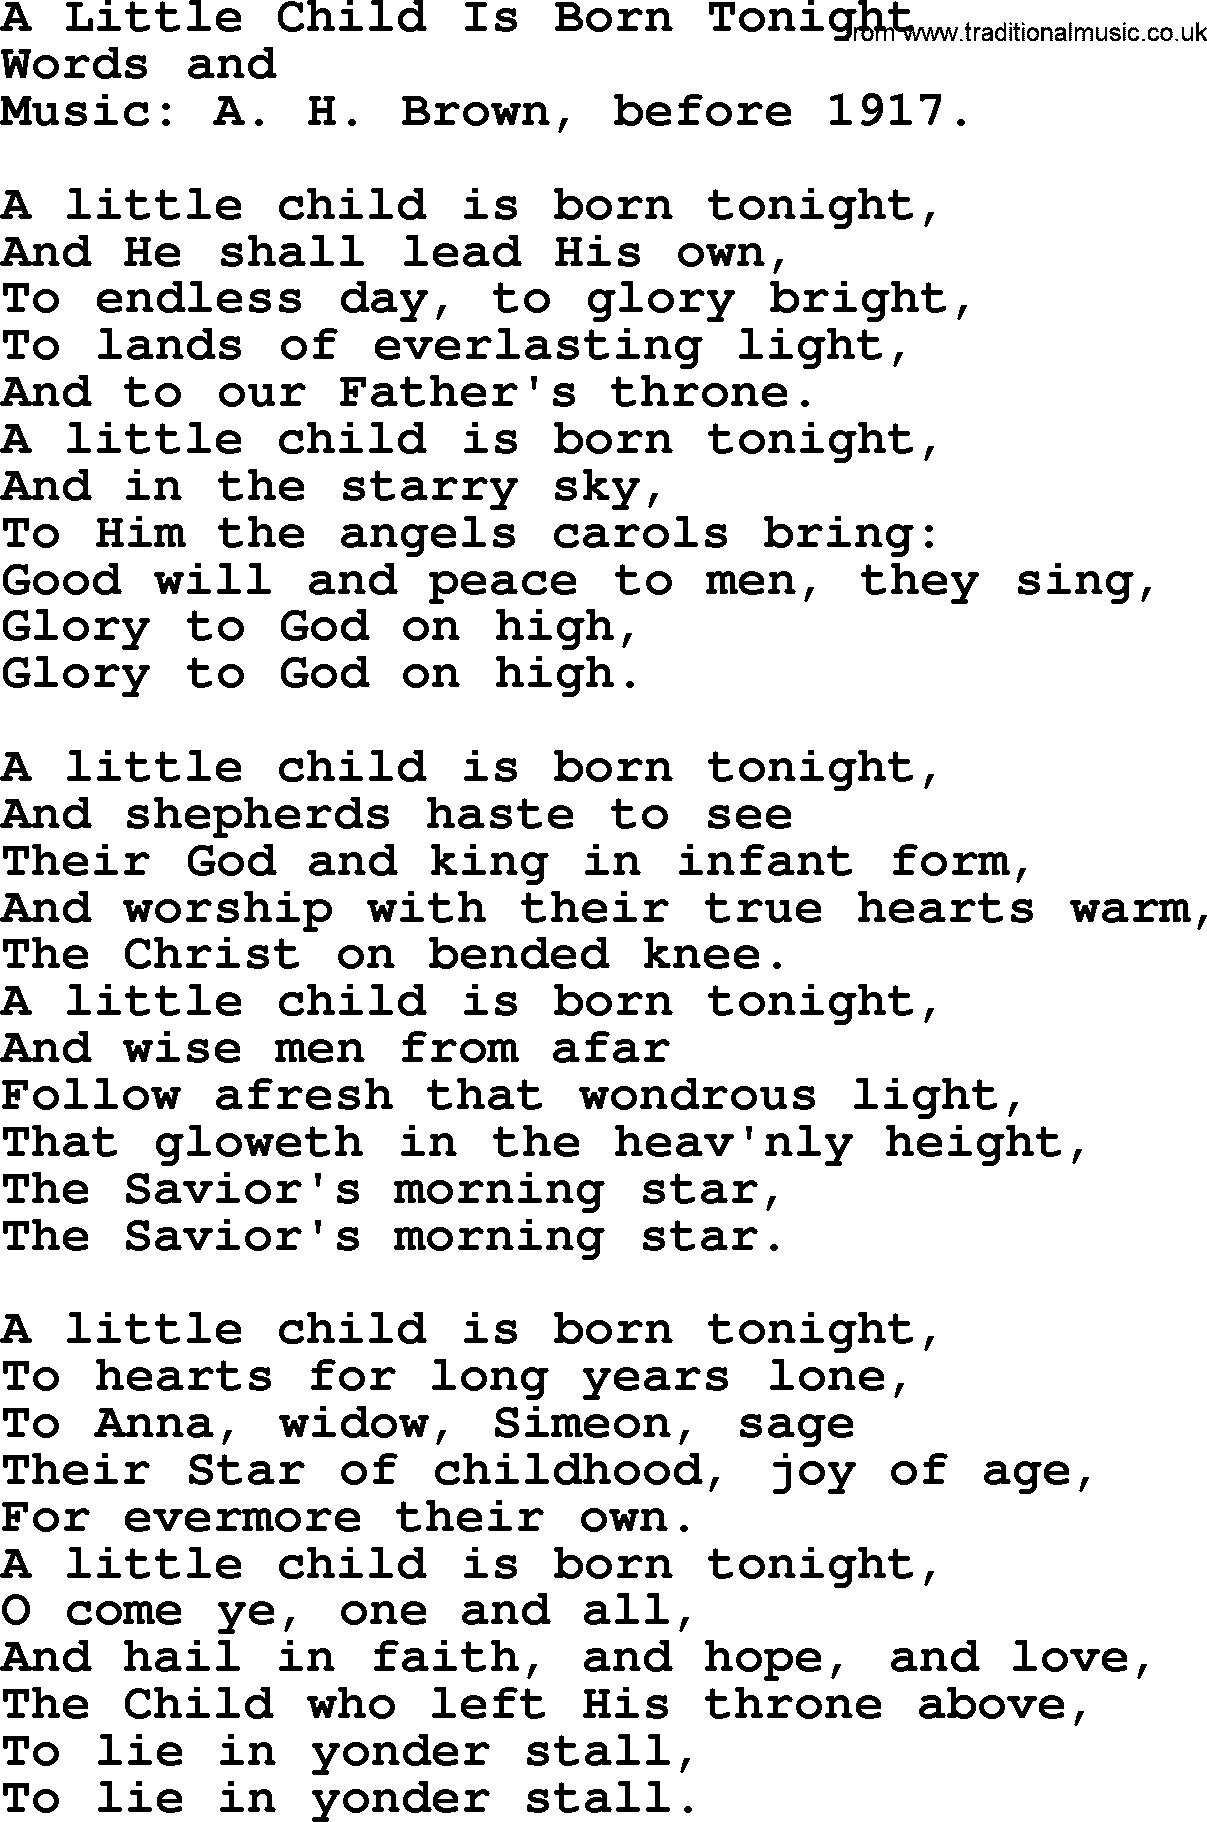 Christmas Hymns, Carols and Songs, title: A Little Child Is Born Tonight - complete lyrics, and PDF